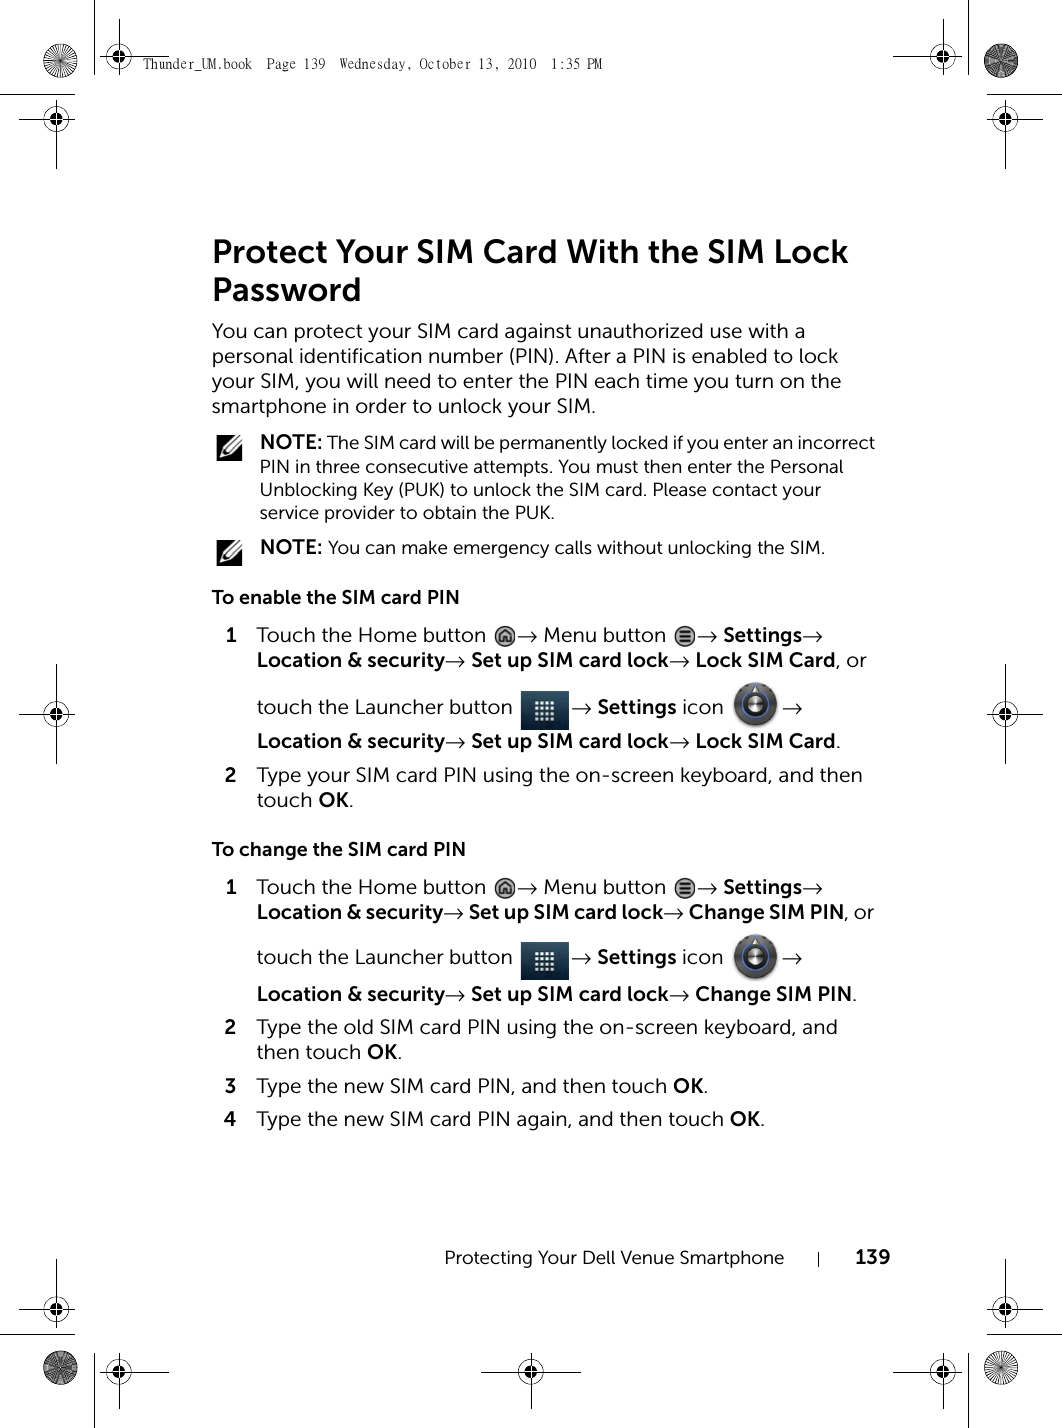 Protecting Your Dell Venue Smartphone 139Protect Your SIM Card With the SIM Lock PasswordYou can protect your SIM card against unauthorized use with a personal identification number (PIN). After a PIN is enabled to lock your SIM, you will need to enter the PIN each time you turn on the smartphone in order to unlock your SIM. NOTE: The SIM card will be permanently locked if you enter an incorrect PIN in three consecutive attempts. You must then enter the Personal Unblocking Key (PUK) to unlock the SIM card. Please contact your service provider to obtain the PUK. NOTE: You can make emergency calls without unlocking the SIM.To enable the SIM card PIN1Touch the Home button  → Menu button  → Settings→ Location &amp; security→ Set up SIM card lock→ Lock SIM Card, ortouch the Launcher button  → Settings icon  → Location &amp; security→ Set up SIM card lock→ Lock SIM Card.2Type your SIM card PIN using the on-screen keyboard, and then touch OK.To change the SIM card PIN1Touch the Home button  → Menu button  → Settings→ Location &amp; security→ Set up SIM card lock→ Change SIM PIN, or touch the Launcher button  → Settings icon  → Location &amp; security→ Set up SIM card lock→ Change SIM PIN.2Type the old SIM card PIN using the on-screen keyboard, and then touch OK.3Type the new SIM card PIN, and then touch OK.4Type the new SIM card PIN again, and then touch OK.Thunder_UM.book  Page 139  Wednesday, October 13, 2010  1:35 PM